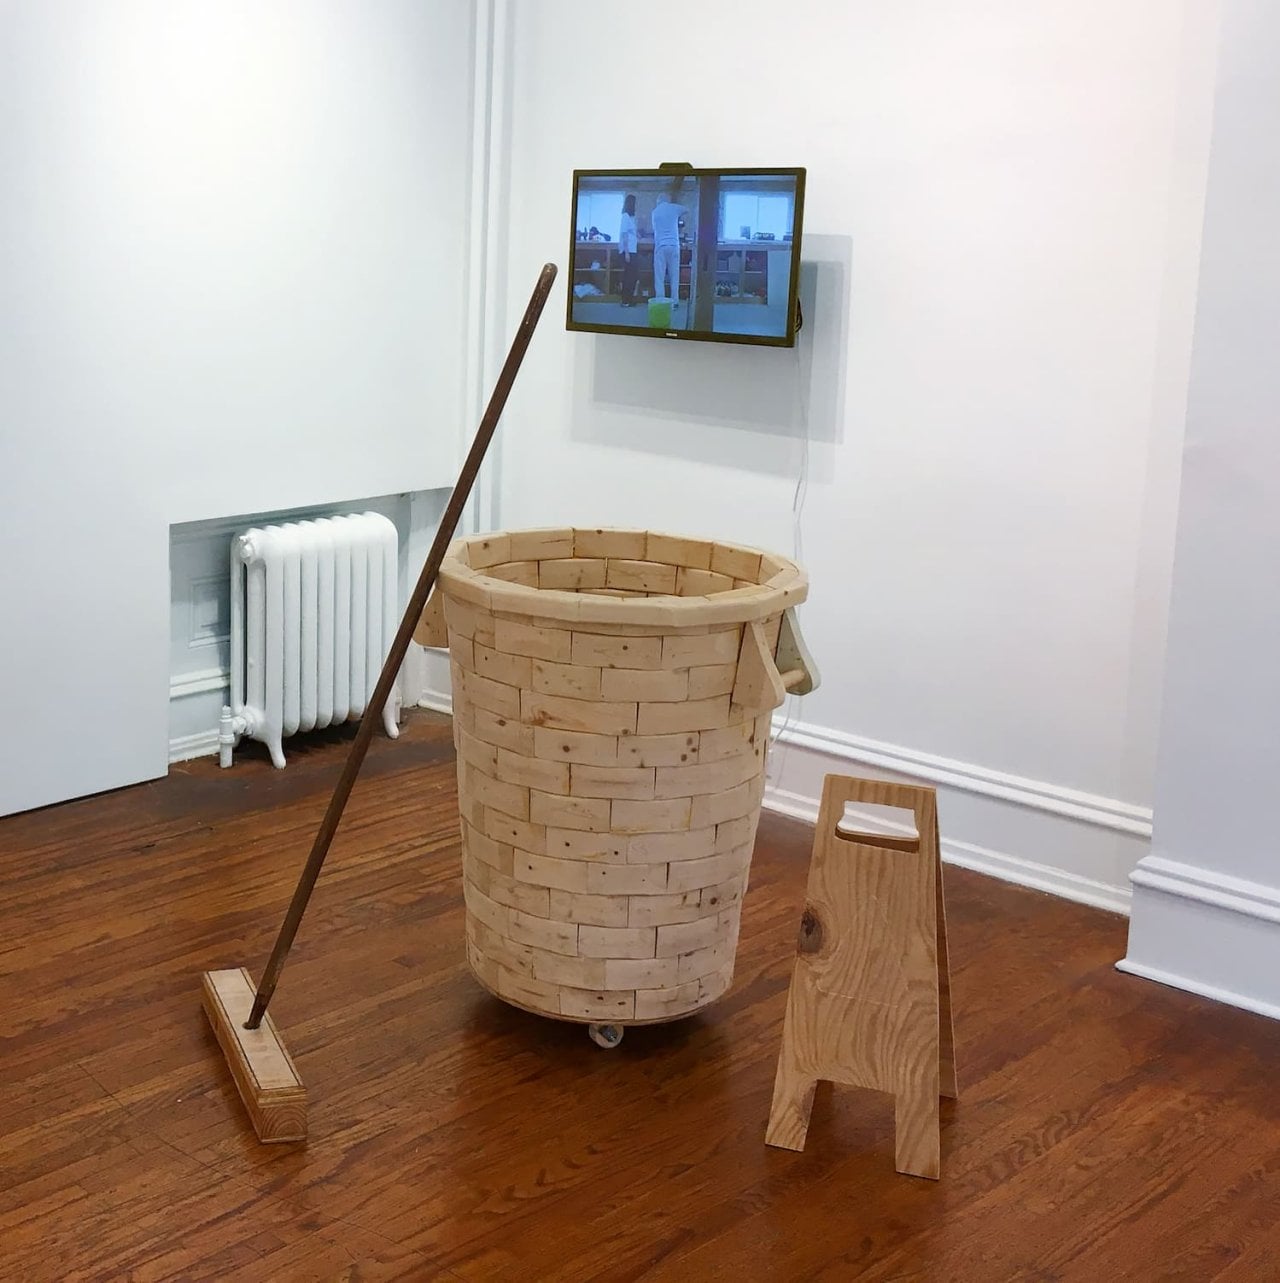 Wooden trash cart, folding sign, and broom arranged in a gallery